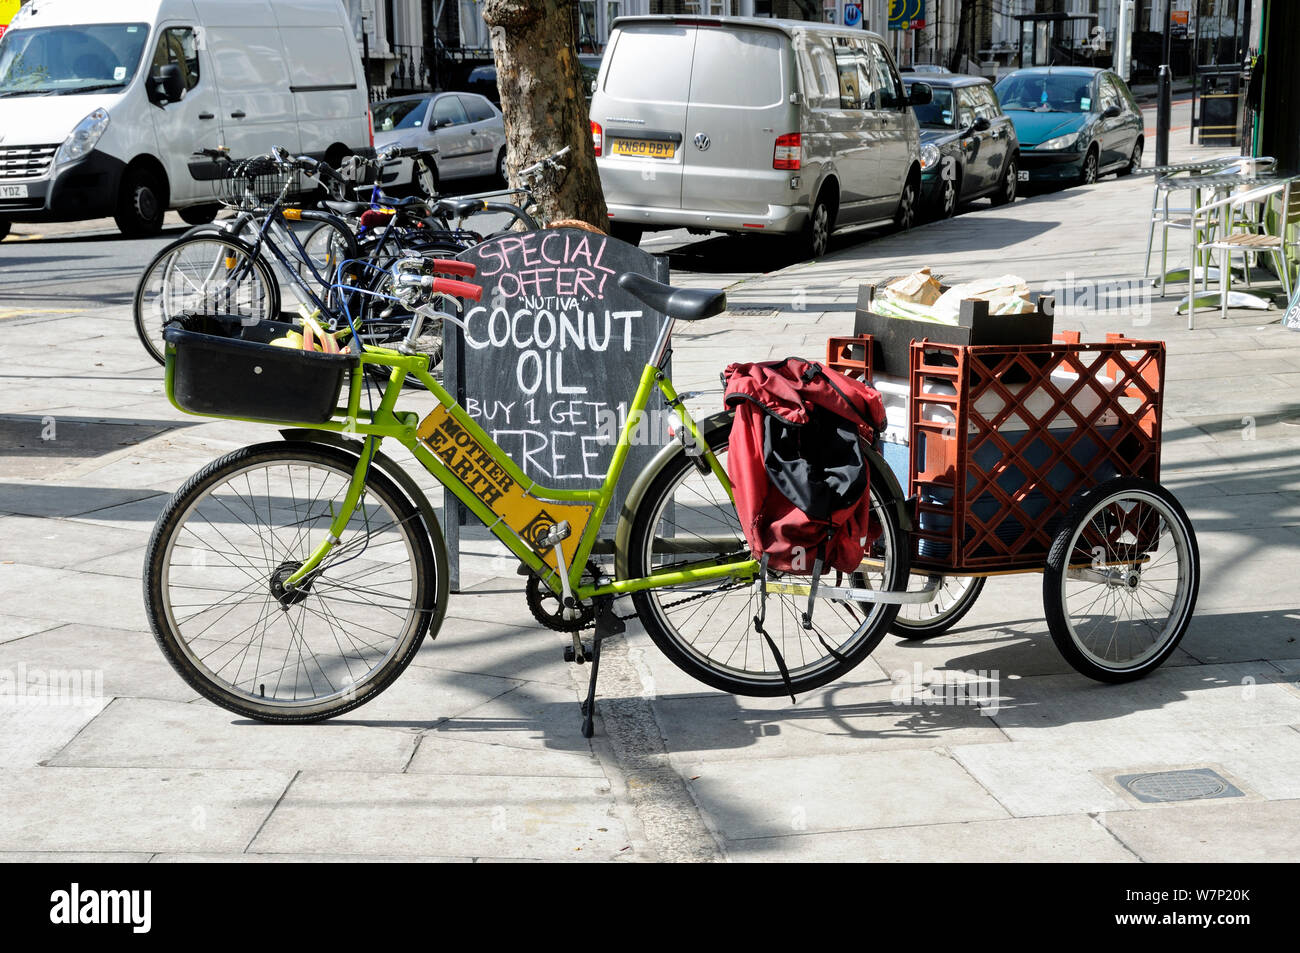 Delivery bicycle with trailer, Mother Earth shop, Newington Green, London Borough of Islington, UK Stock Photo